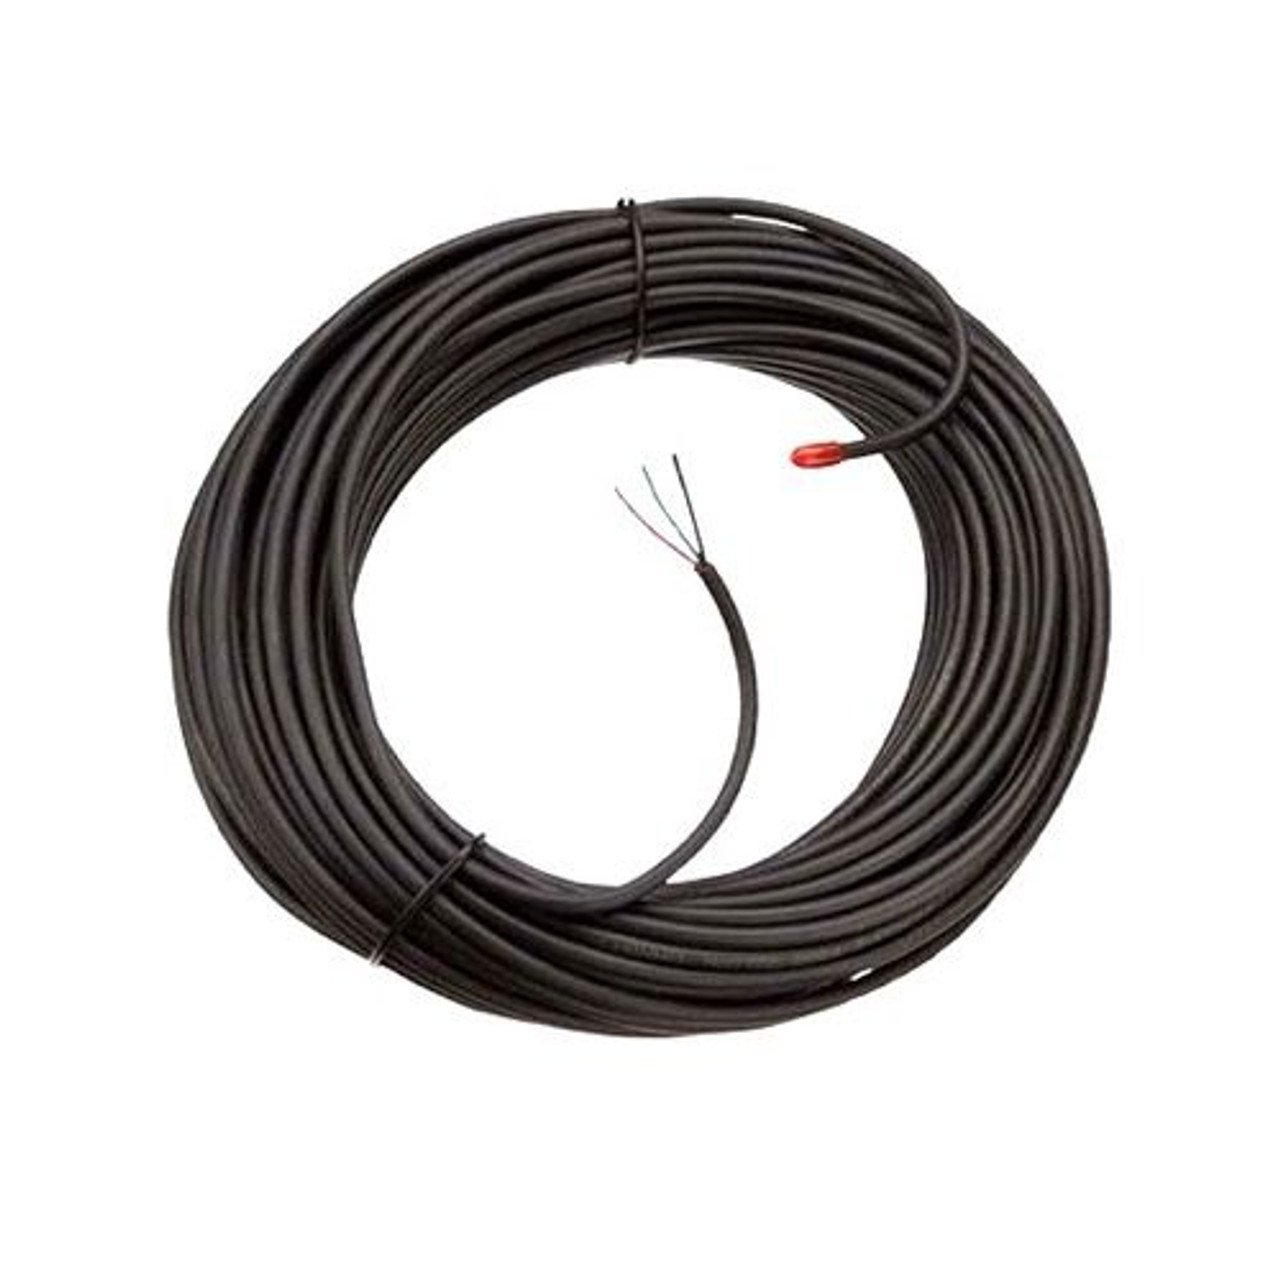 Channel Master 9554 Antenna Rotor Control Cable 3 Conductor By The Ft. 22 AWG Antenna Rotor Wire Cable By The Foot, Round Automatic Heavy Duty TV Aerial Rotator Wire, Bulk Roll, Sold Per Foot, Part # 9554